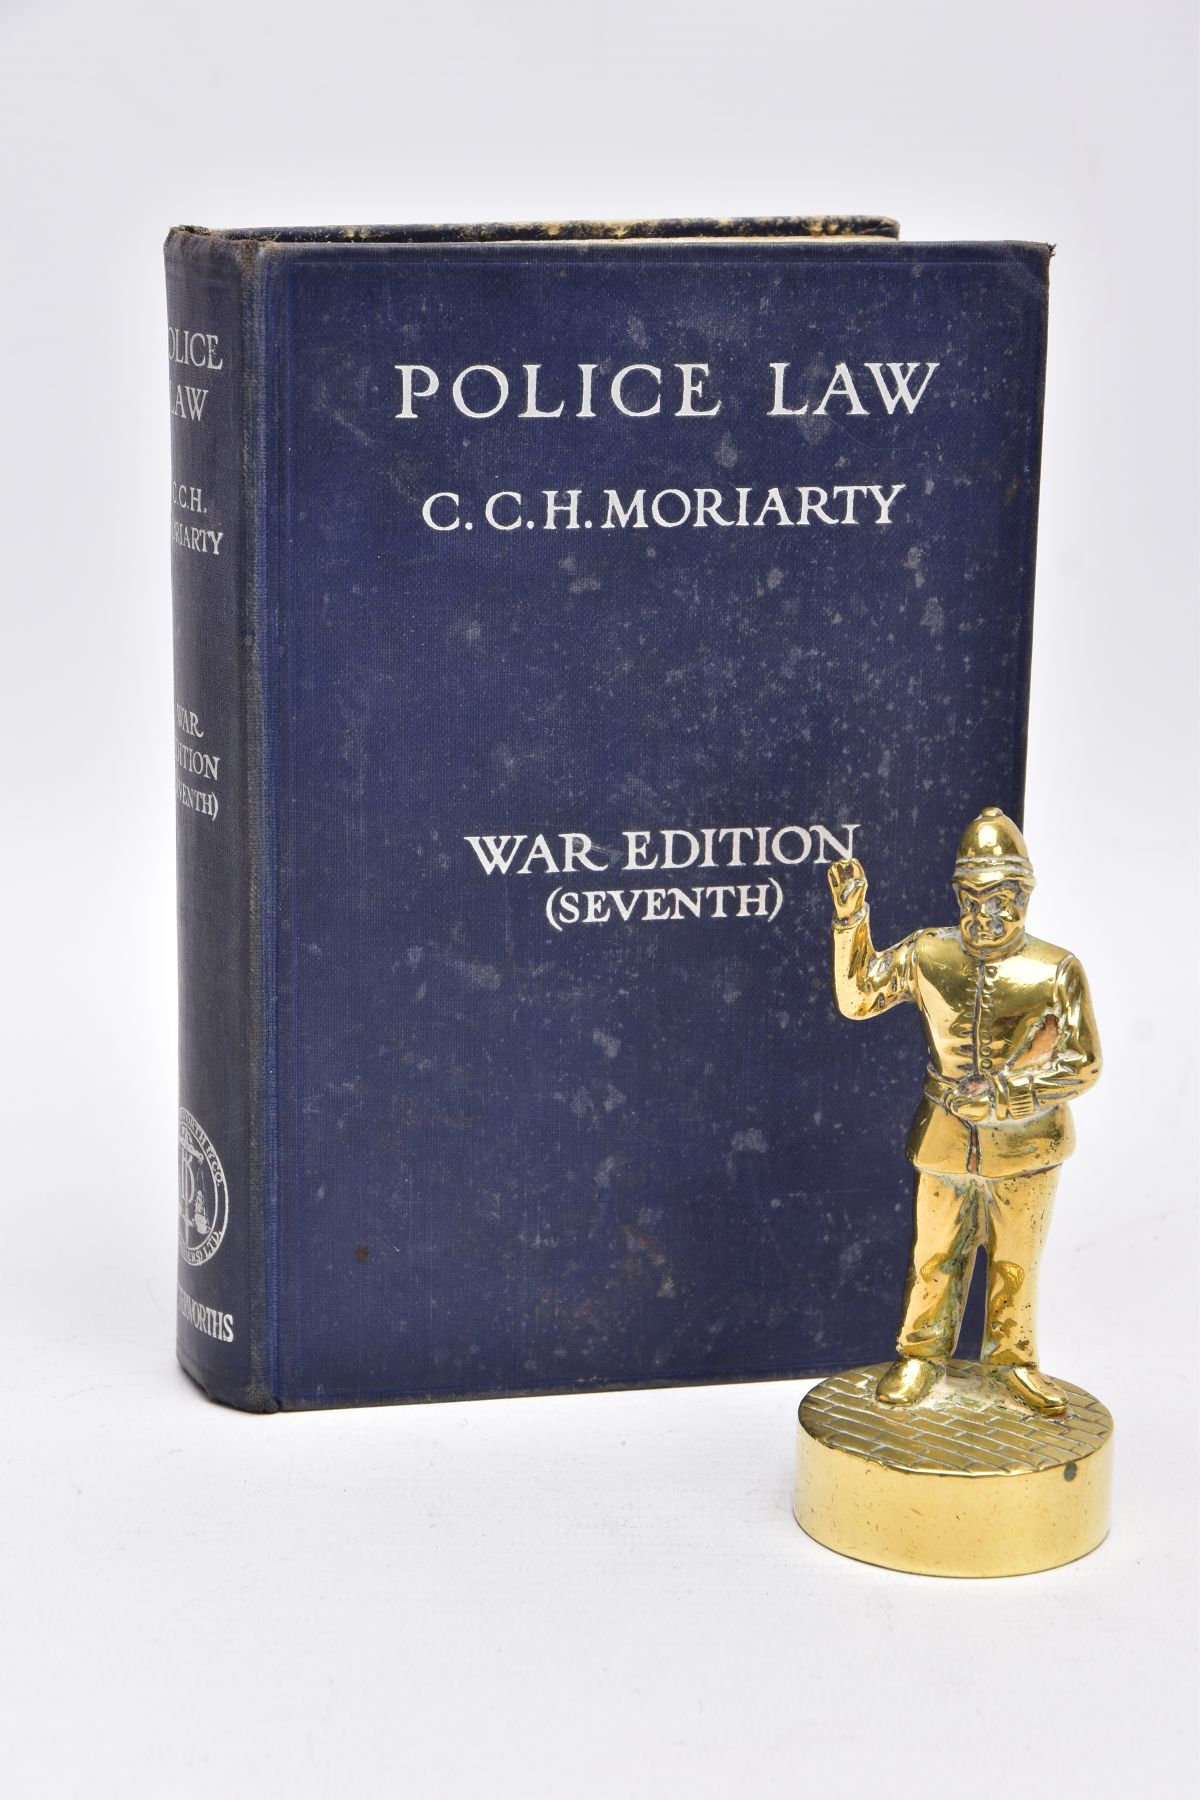 A BOX CONTAINING ITEMS OF POLICE COLLECTORS INTEREST, a hard bound copy of 'Police Law' by C.C.H.